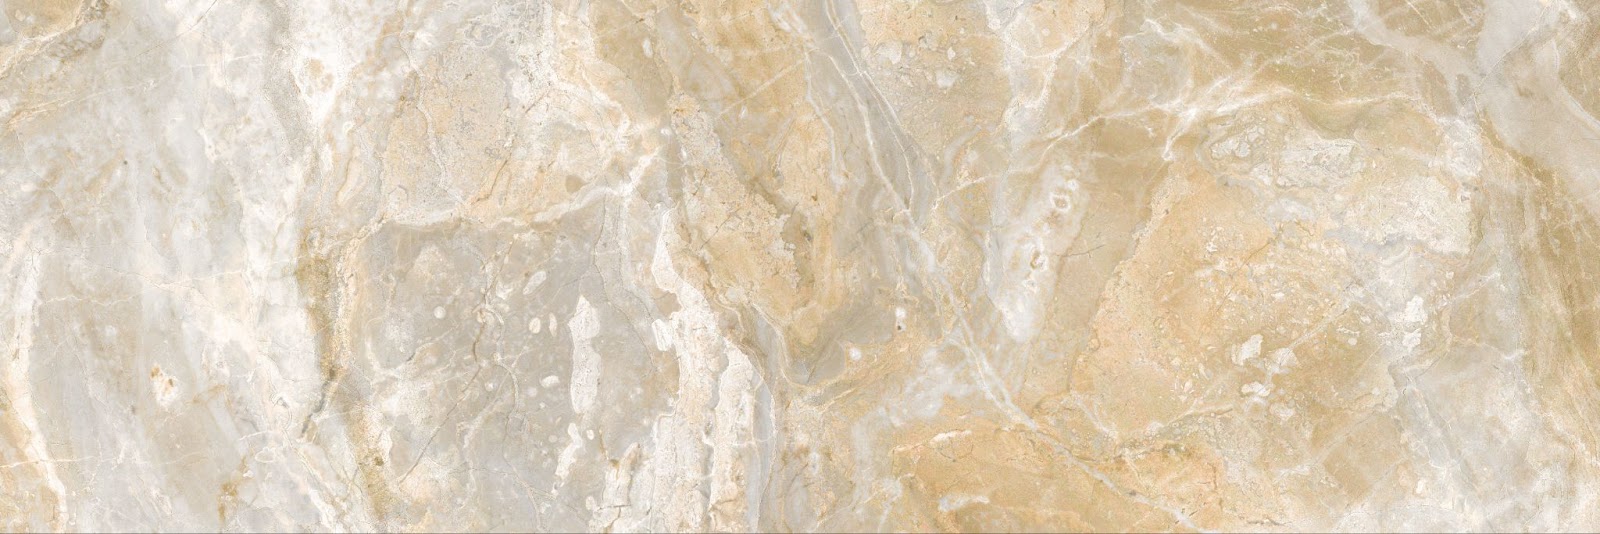 Close-up of white and tan marble floor in a kitchen remodel, adding elegance to the countertop color